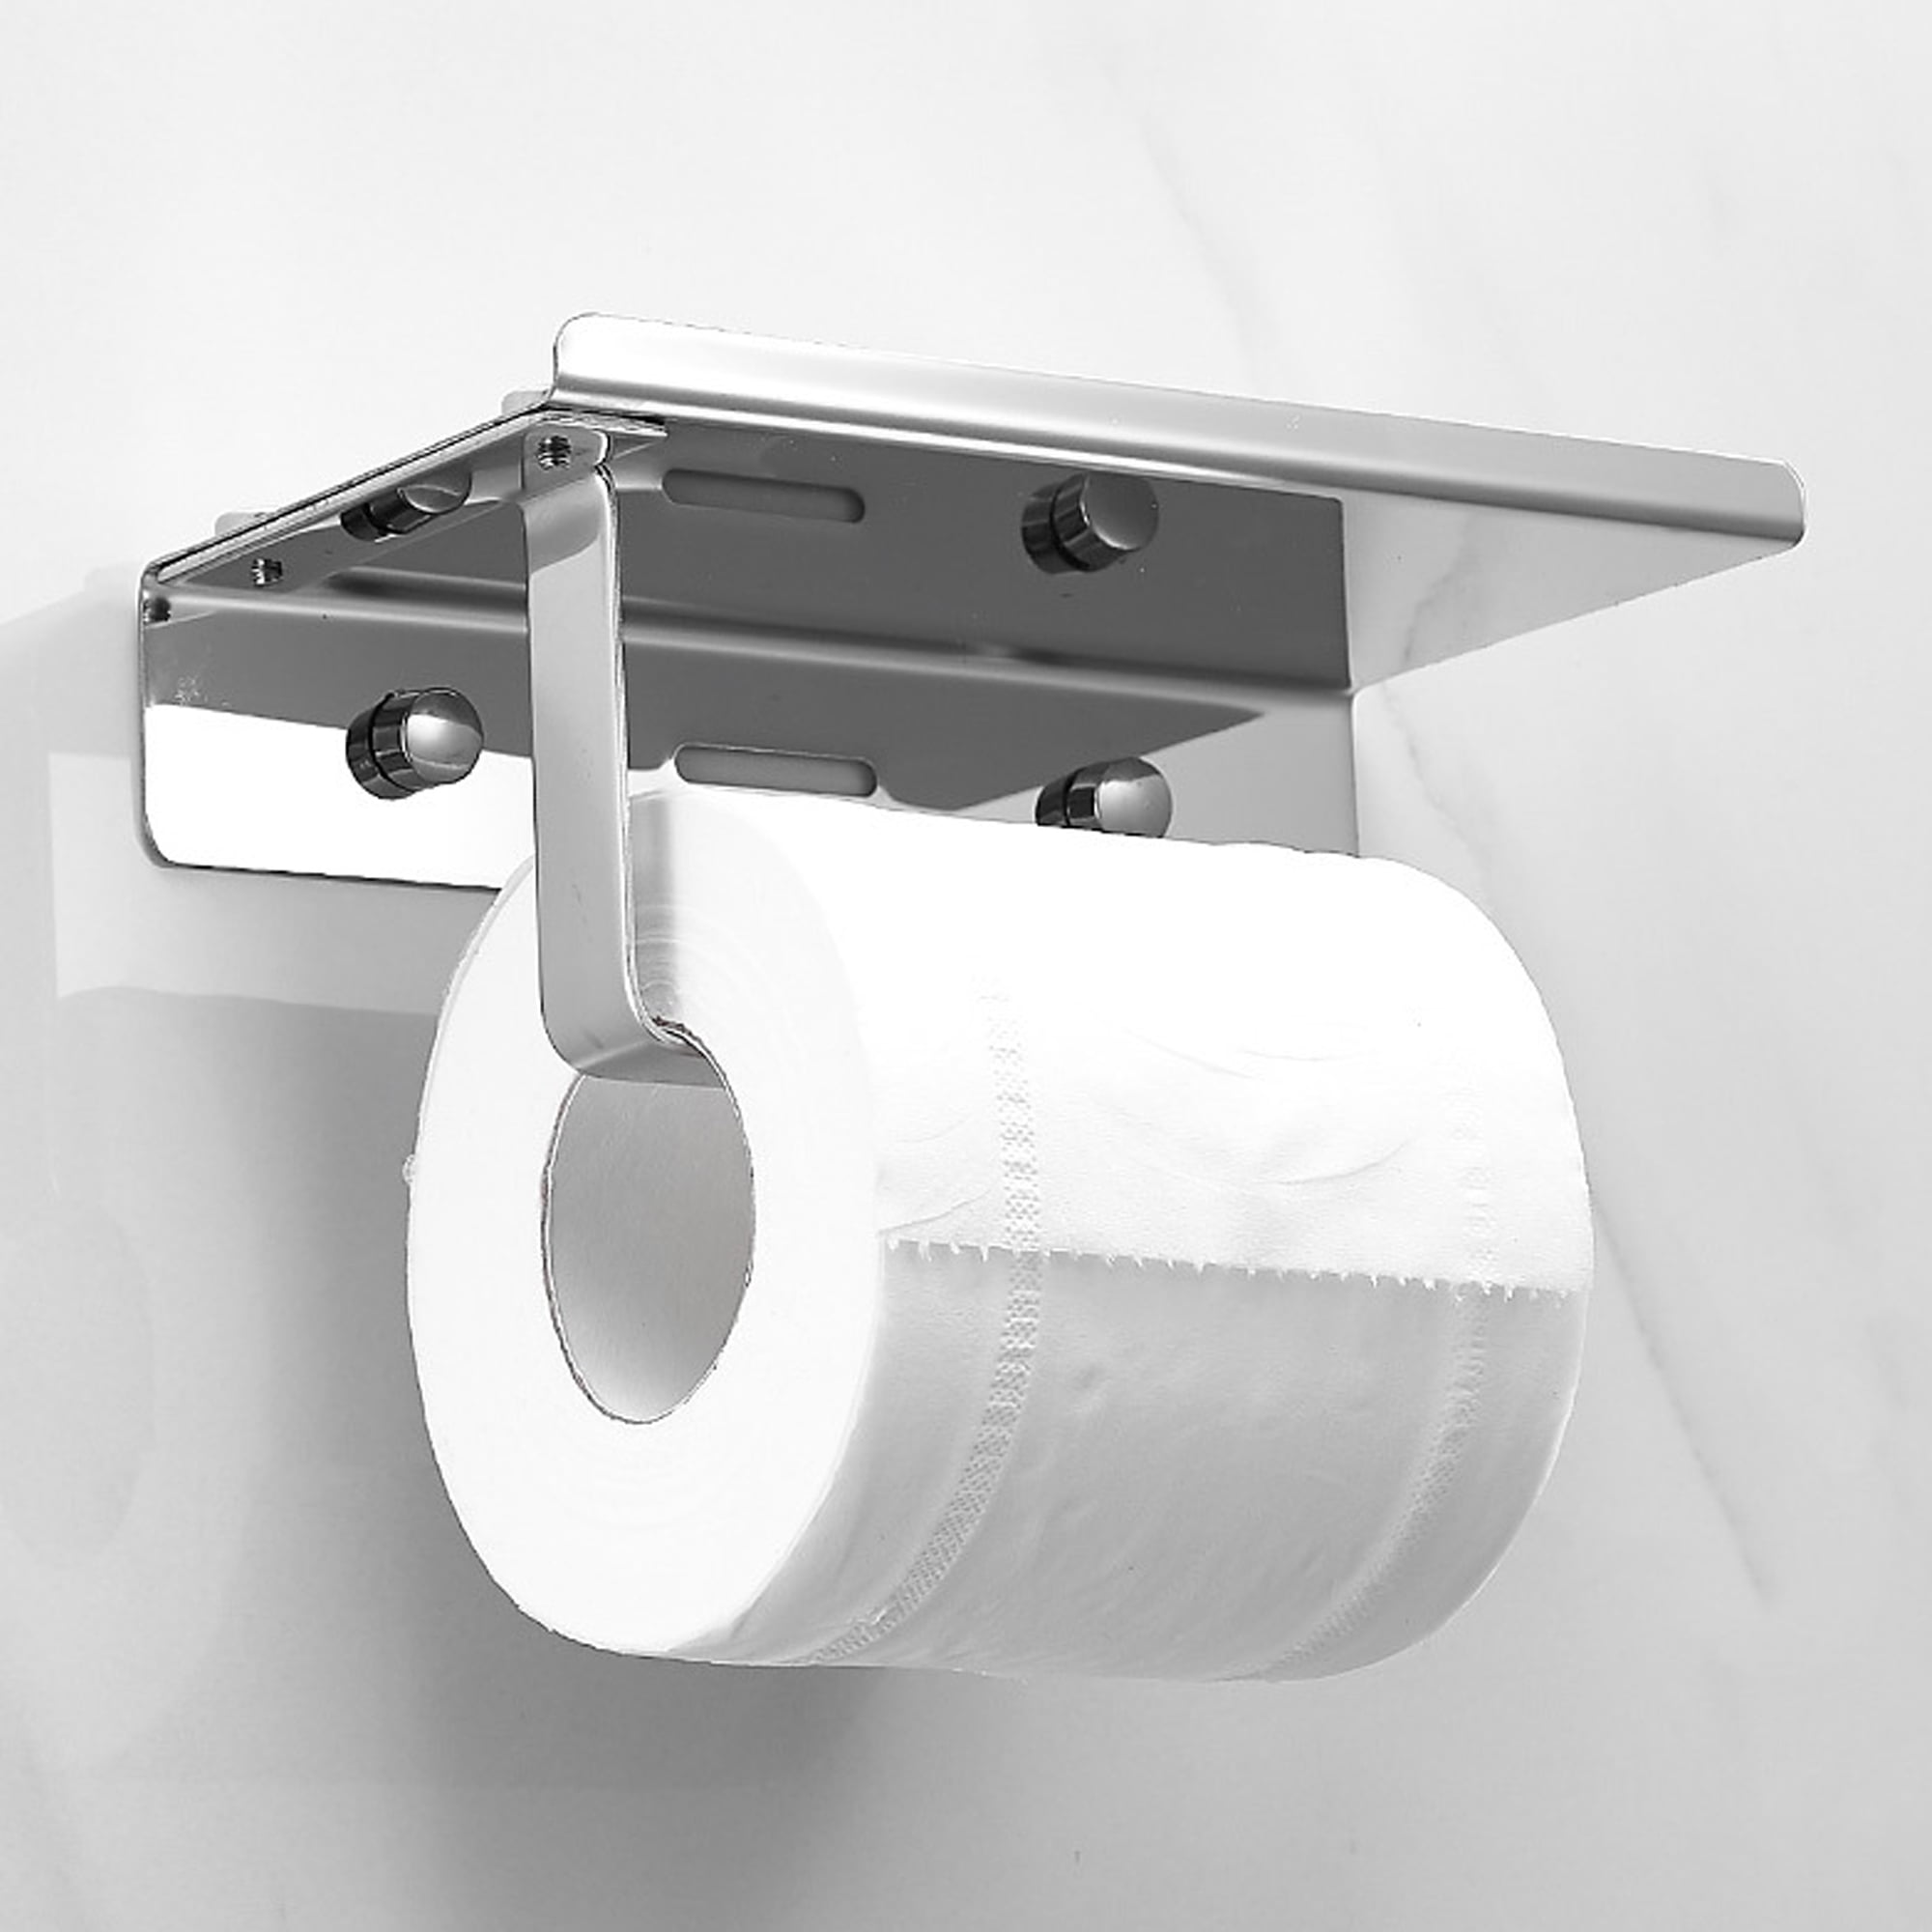 SUS304 Stainless Steel Bathr Toilet Paper Holder with Phone Shelf Wall Mounted 